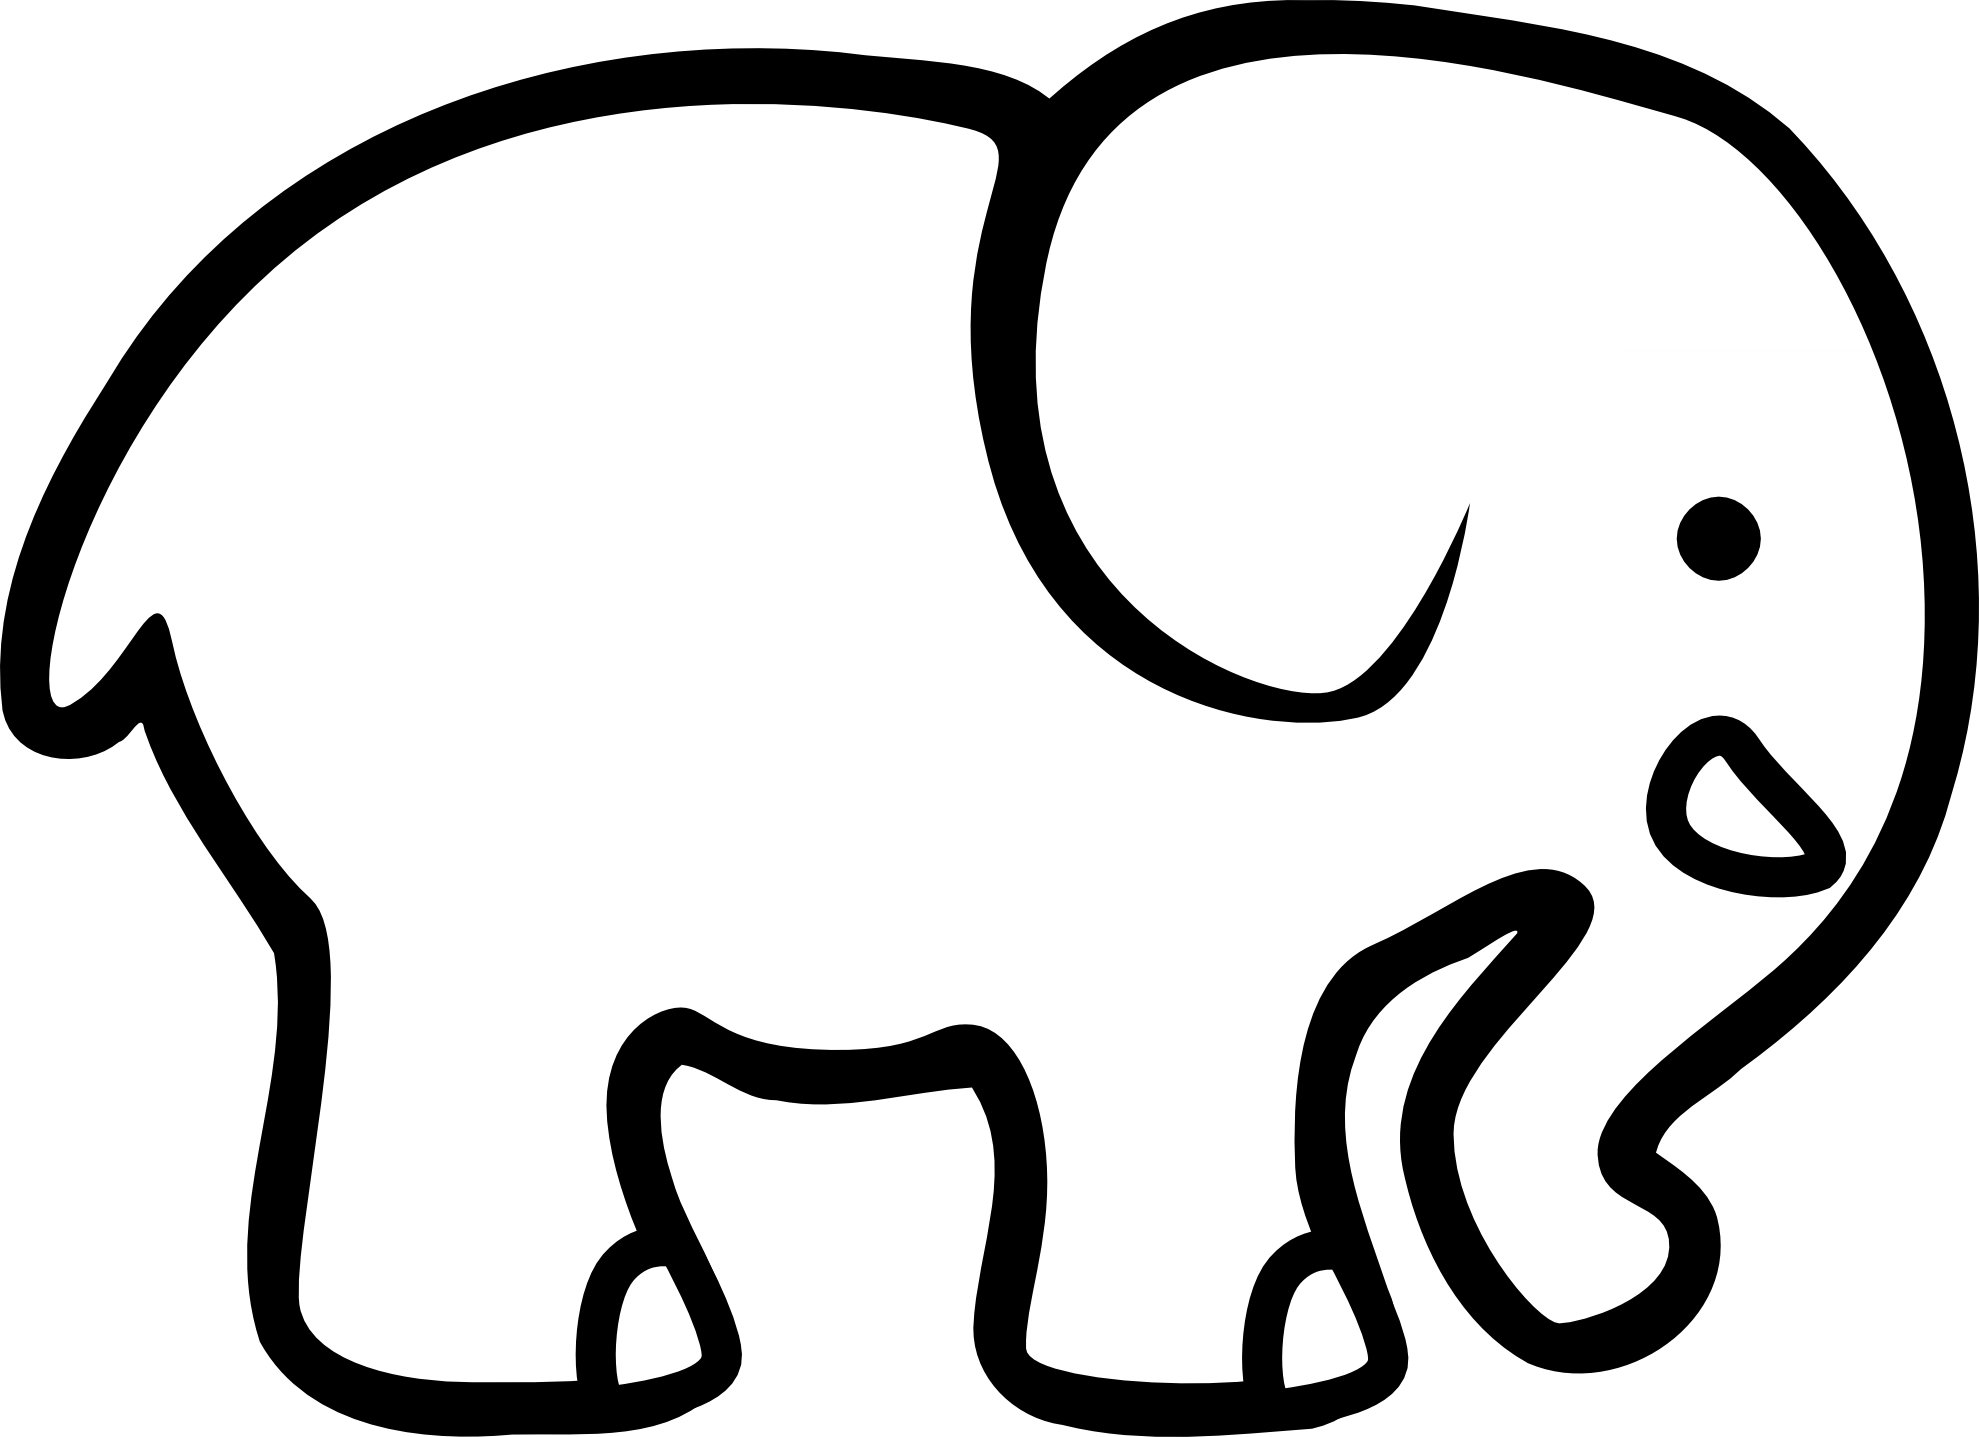 Free Elephant Cartoon Drawing Download Free Clip Art Free Clip Art On Clipart Library